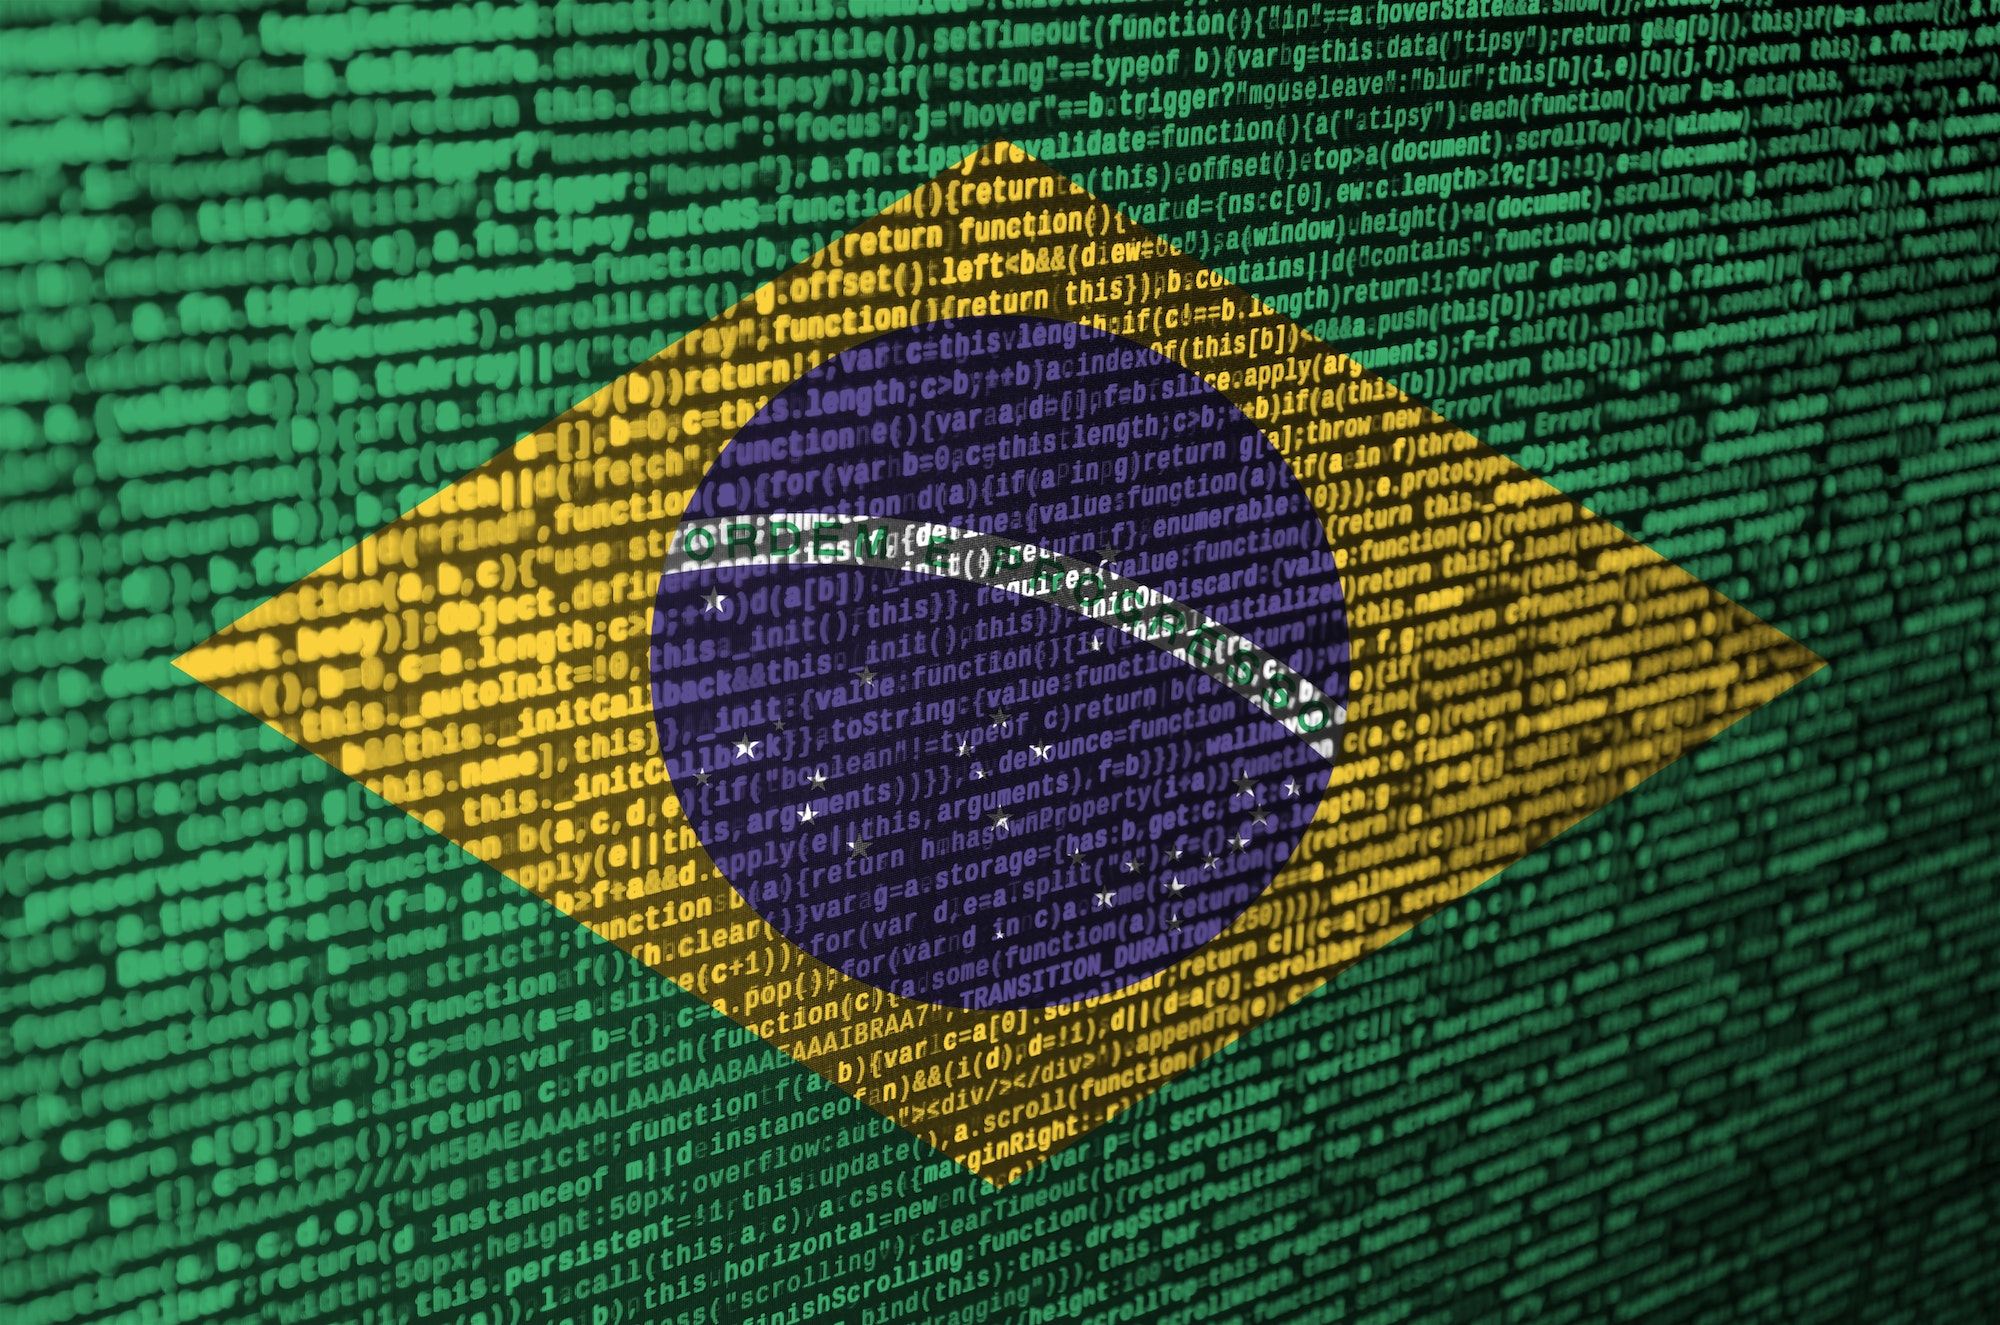 Brazil Flag Is Depicted On The Screen With The Program Code